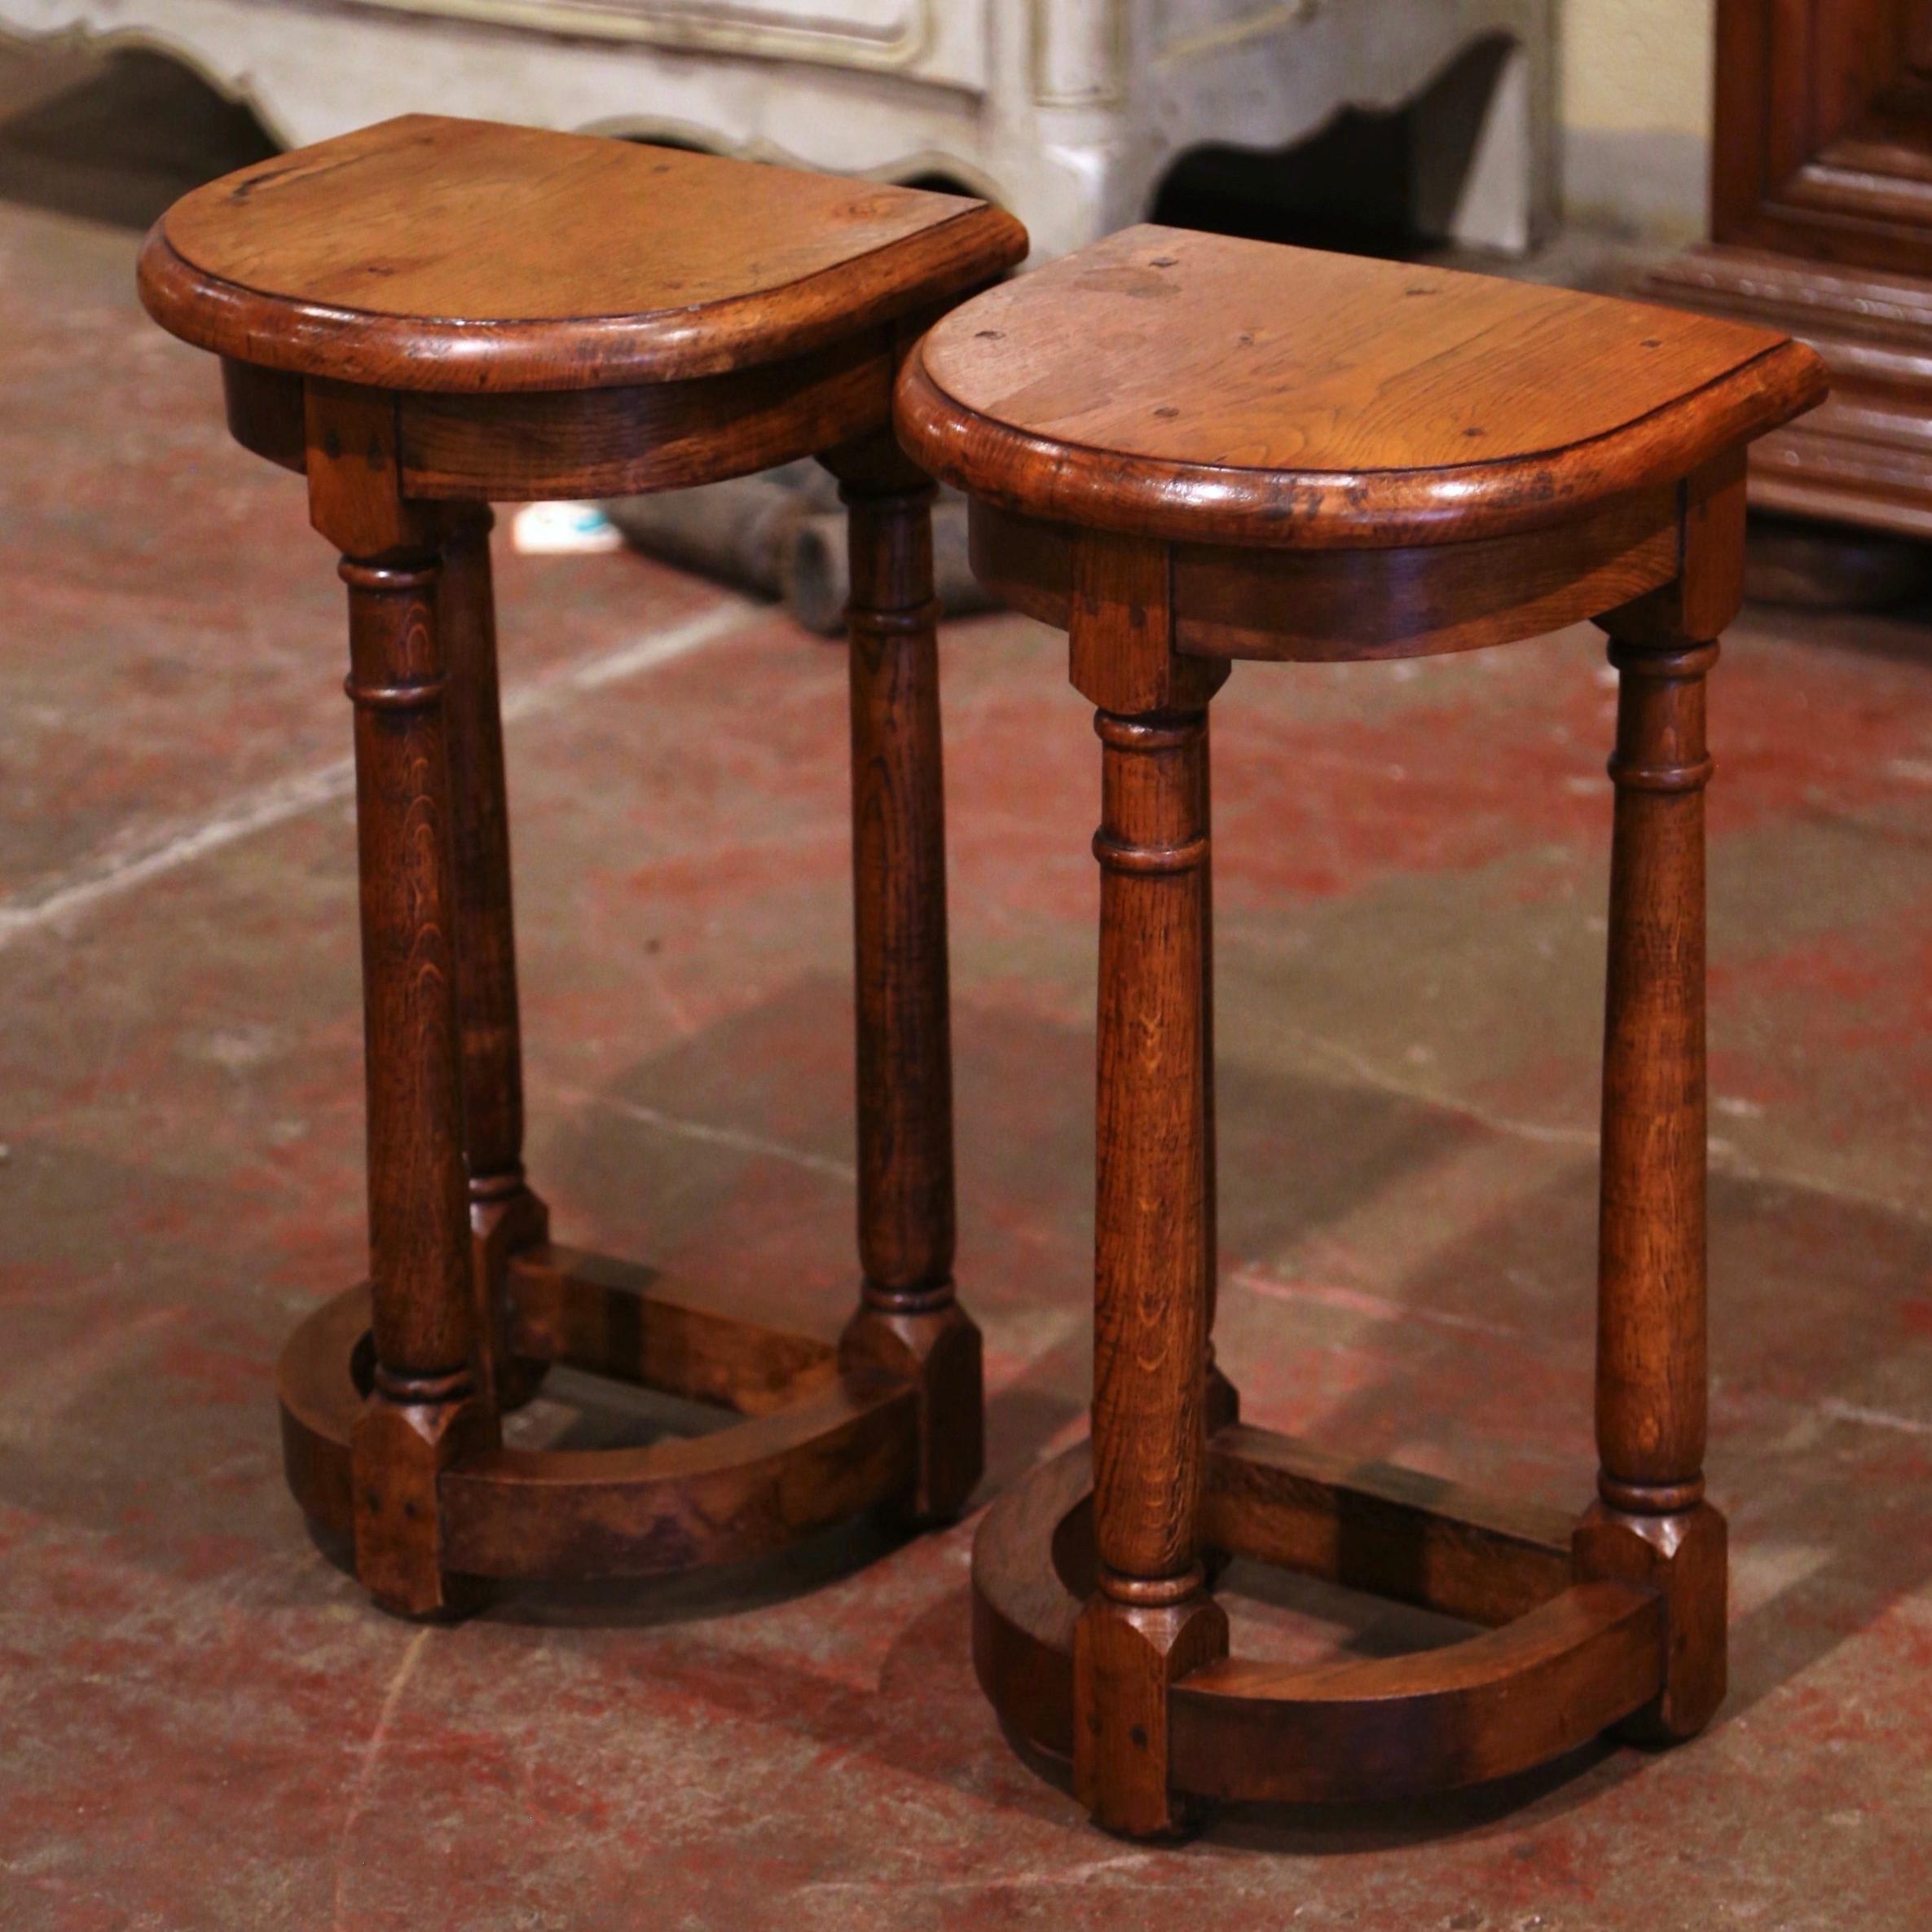 Crafted in the North of France circa 1880 and shaped as half moon, each antique table stands on three elegant turned legs connected with a bottom stretcher. Both tall tables are in excellent condition commensurate with age and use, and adorn a rich